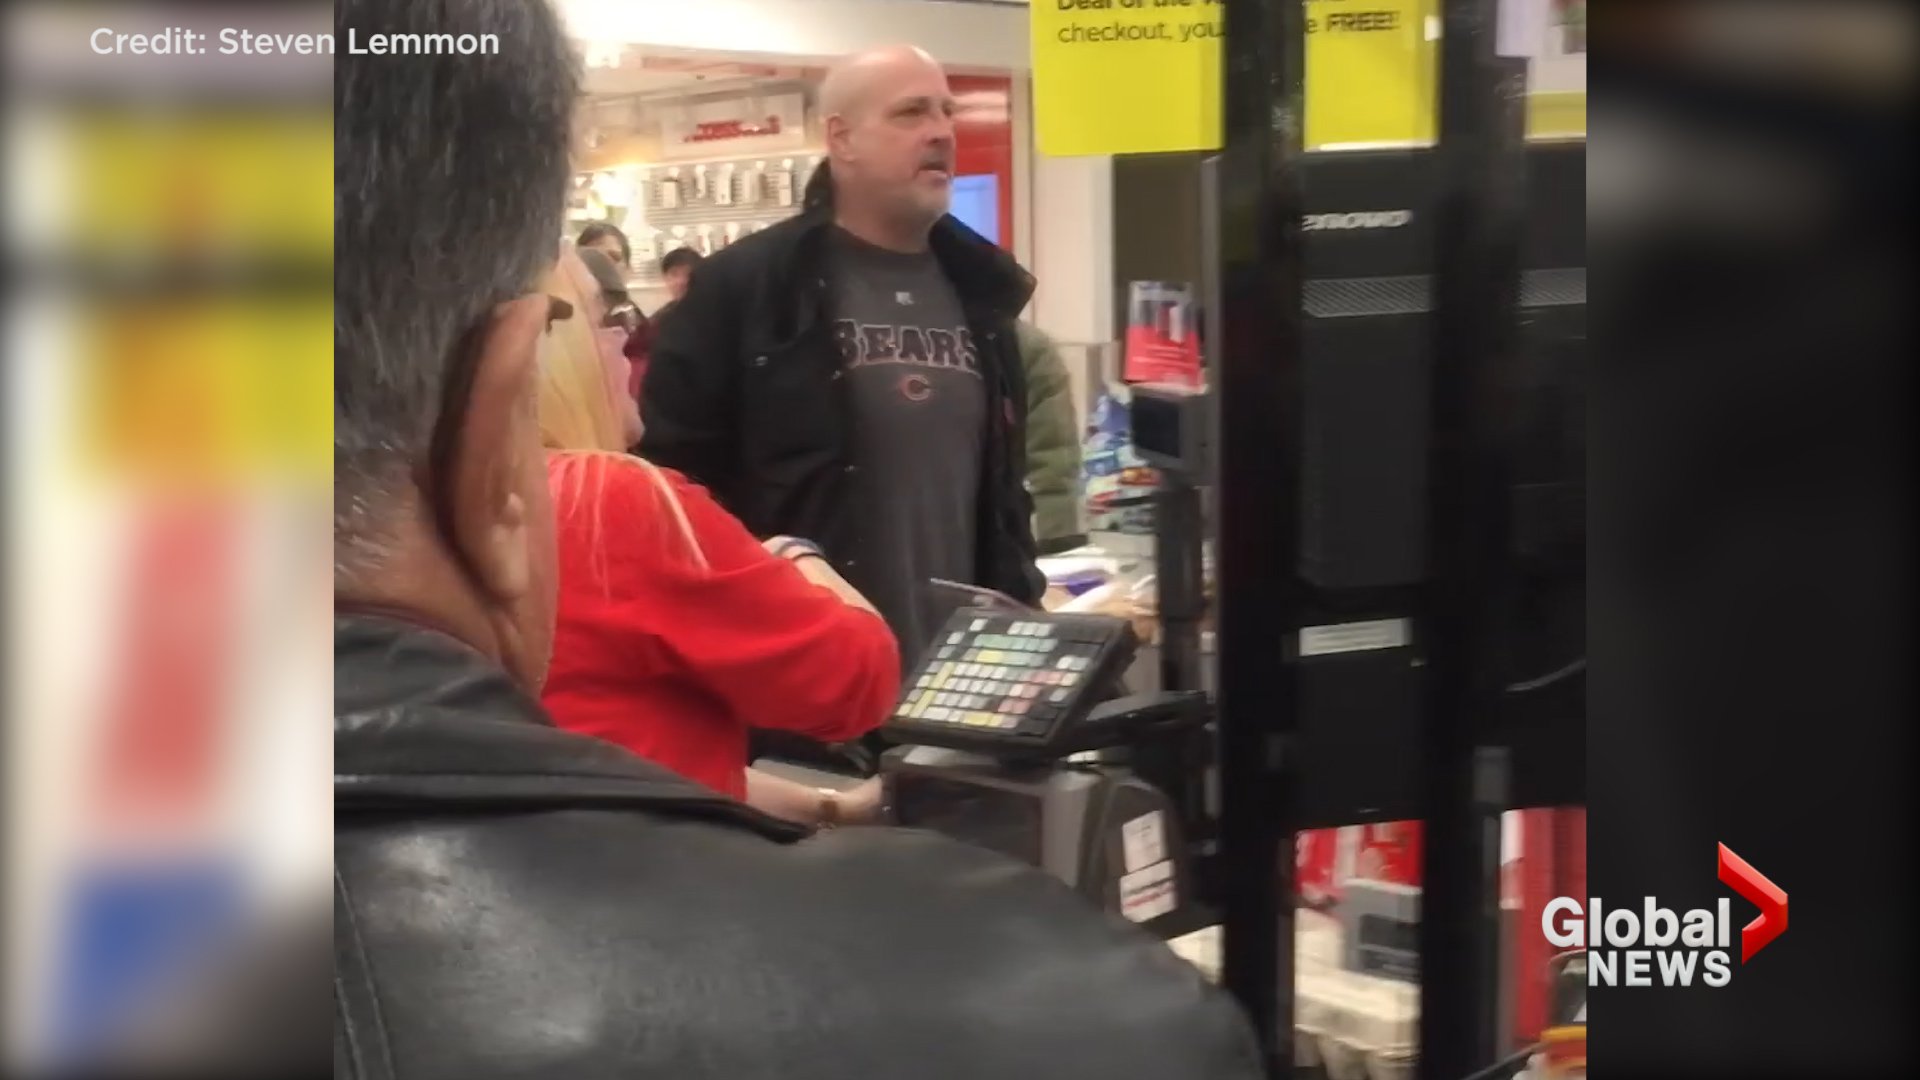 Video captures racist tirade at Calgary Superstore